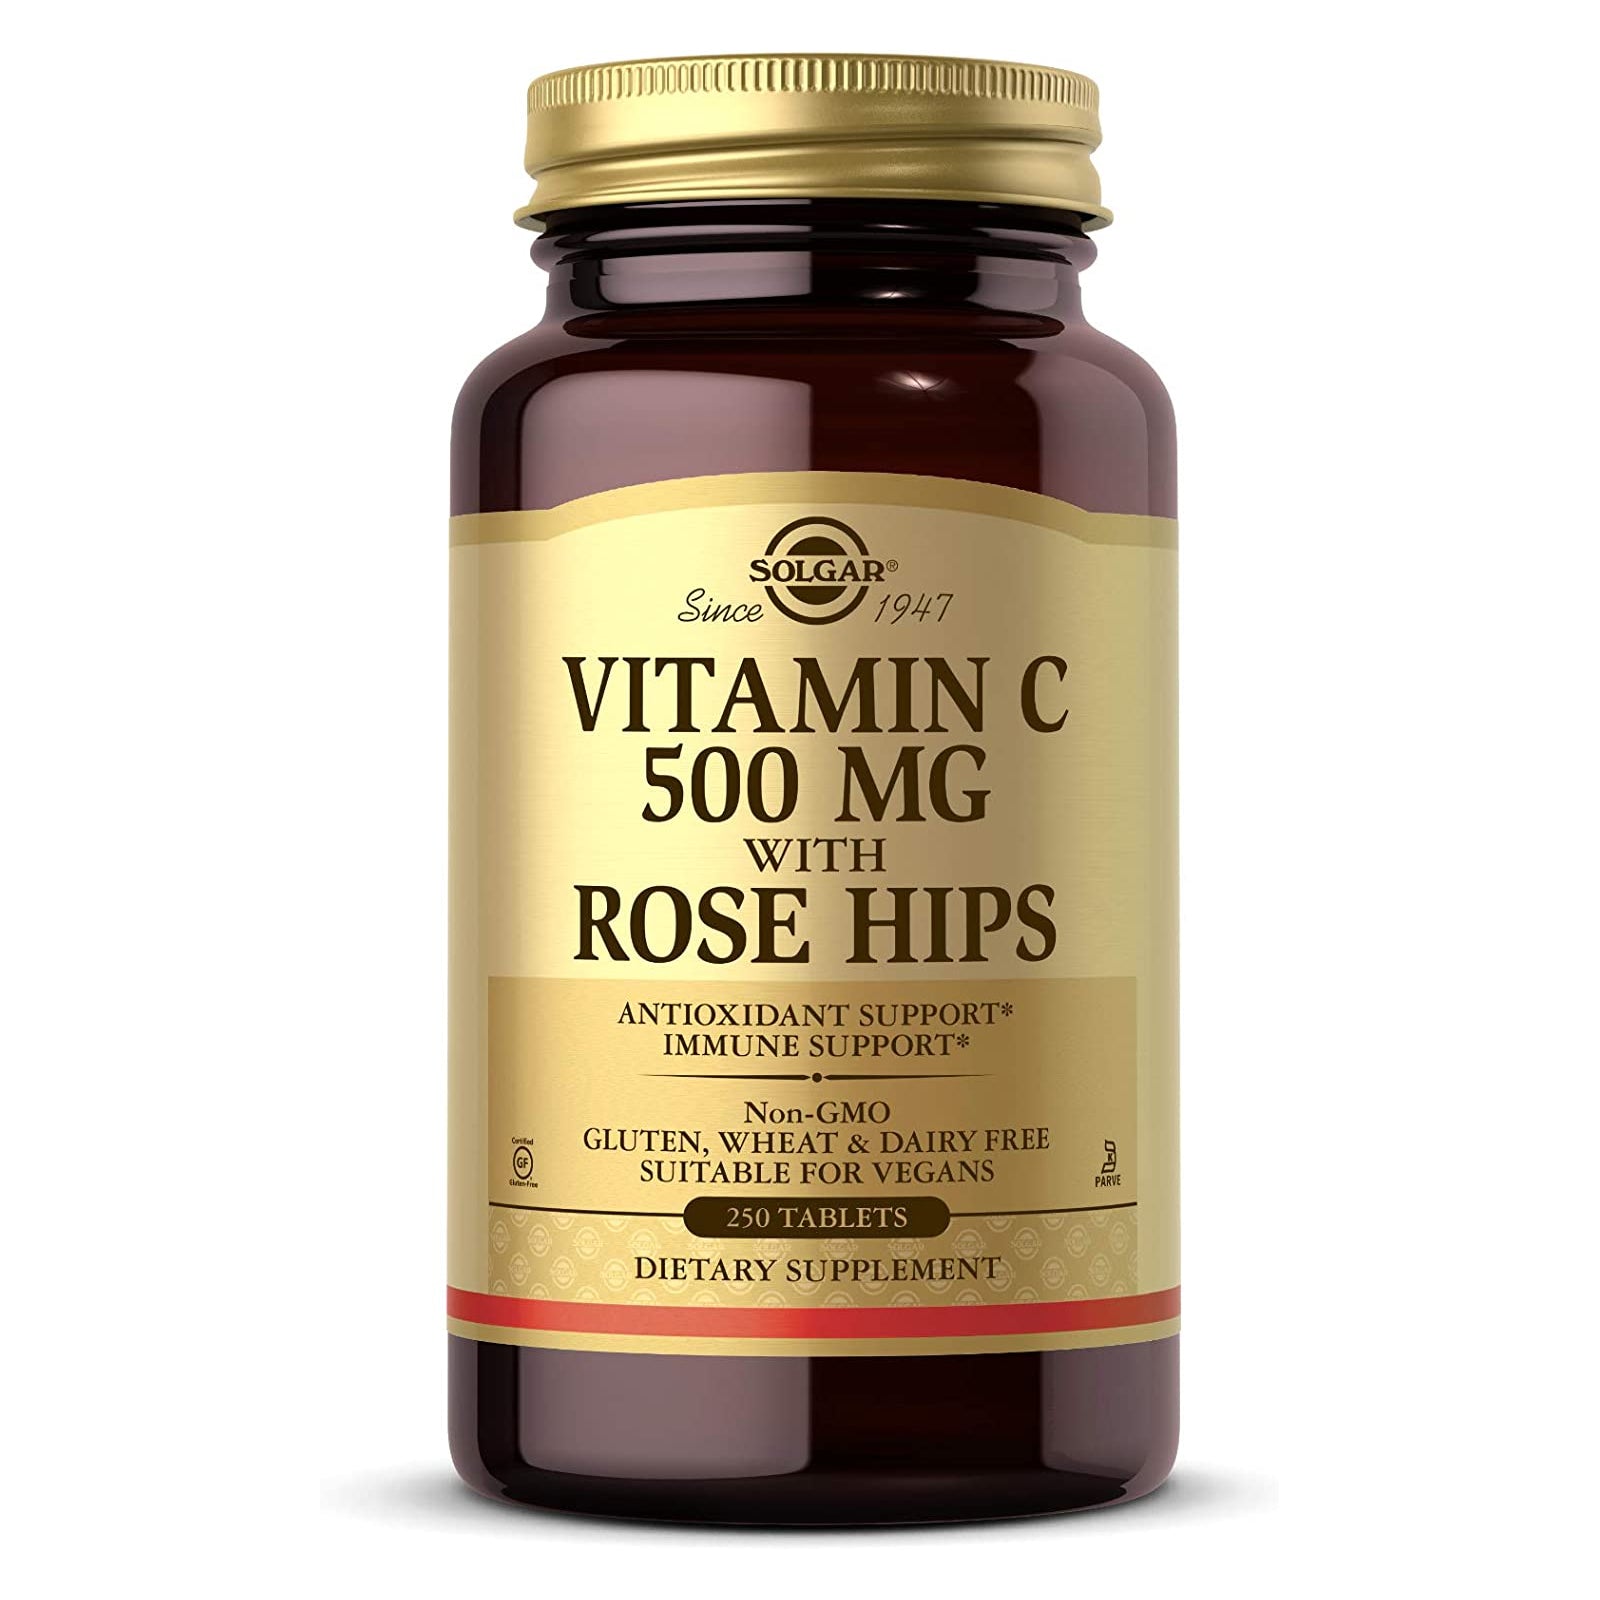 Solgar Vitamin C 500 mg with Rose Hips 250 Tablets